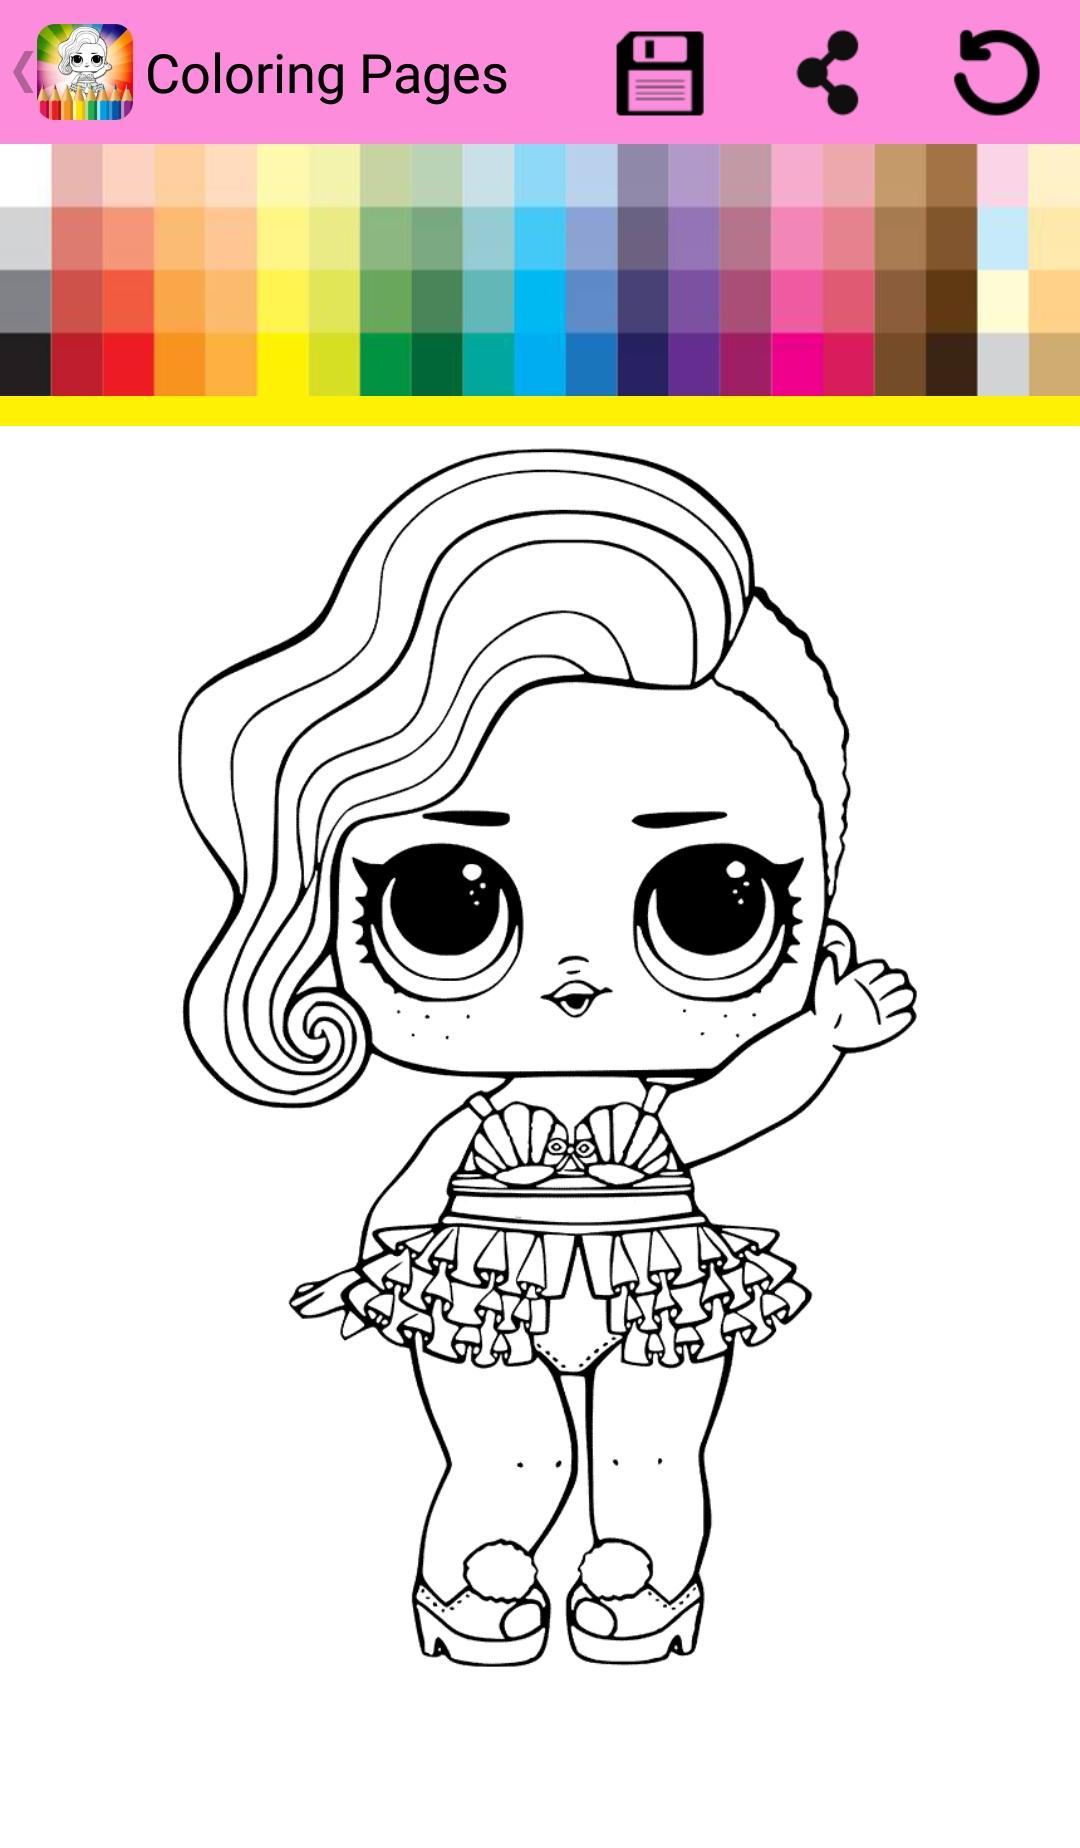 Surprise Lol Dolls Coloring Book for Android - APK Download